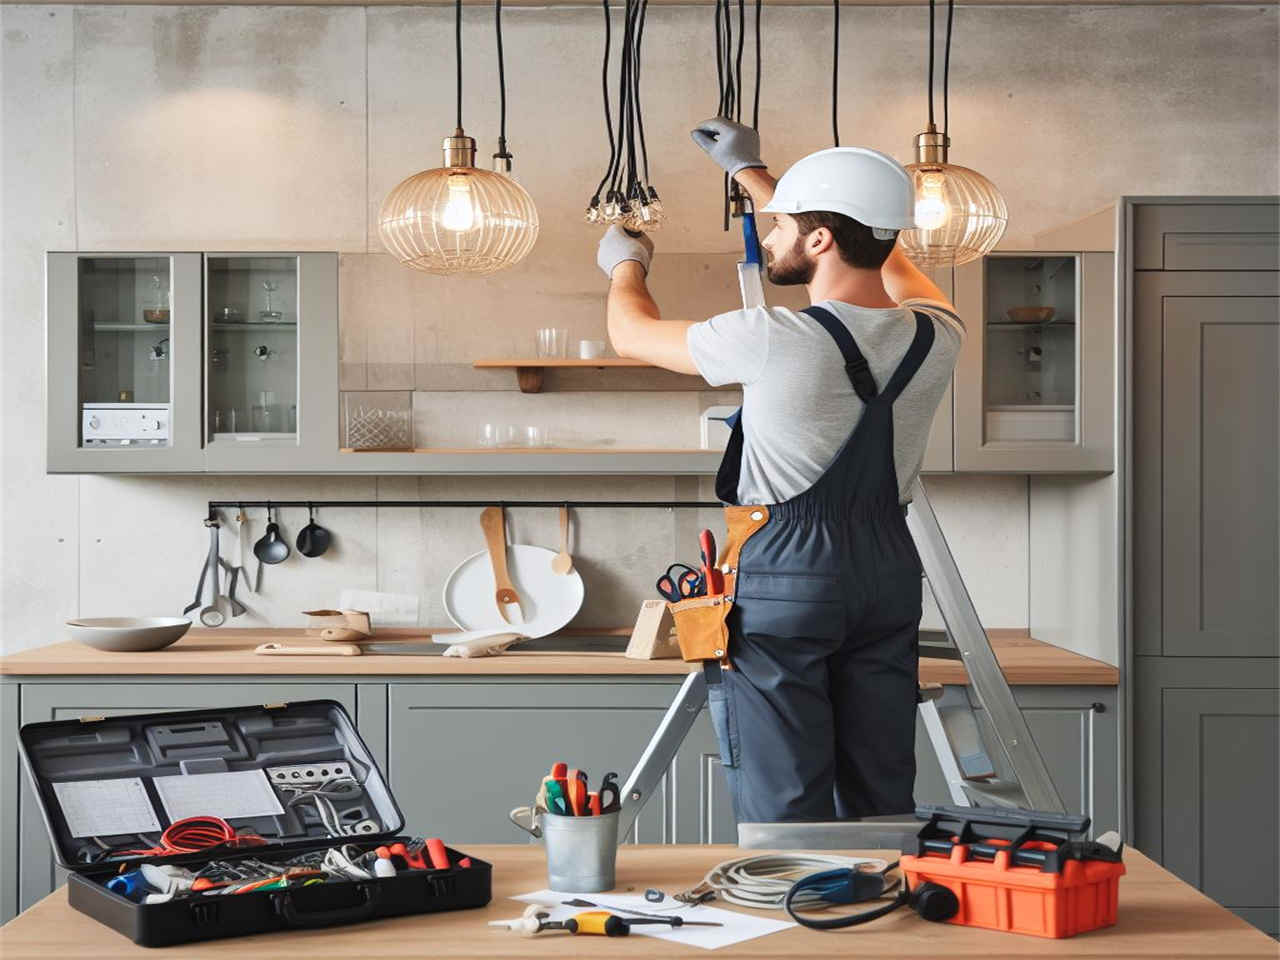 Do You Need an Electrician to Install Pendant Lights?